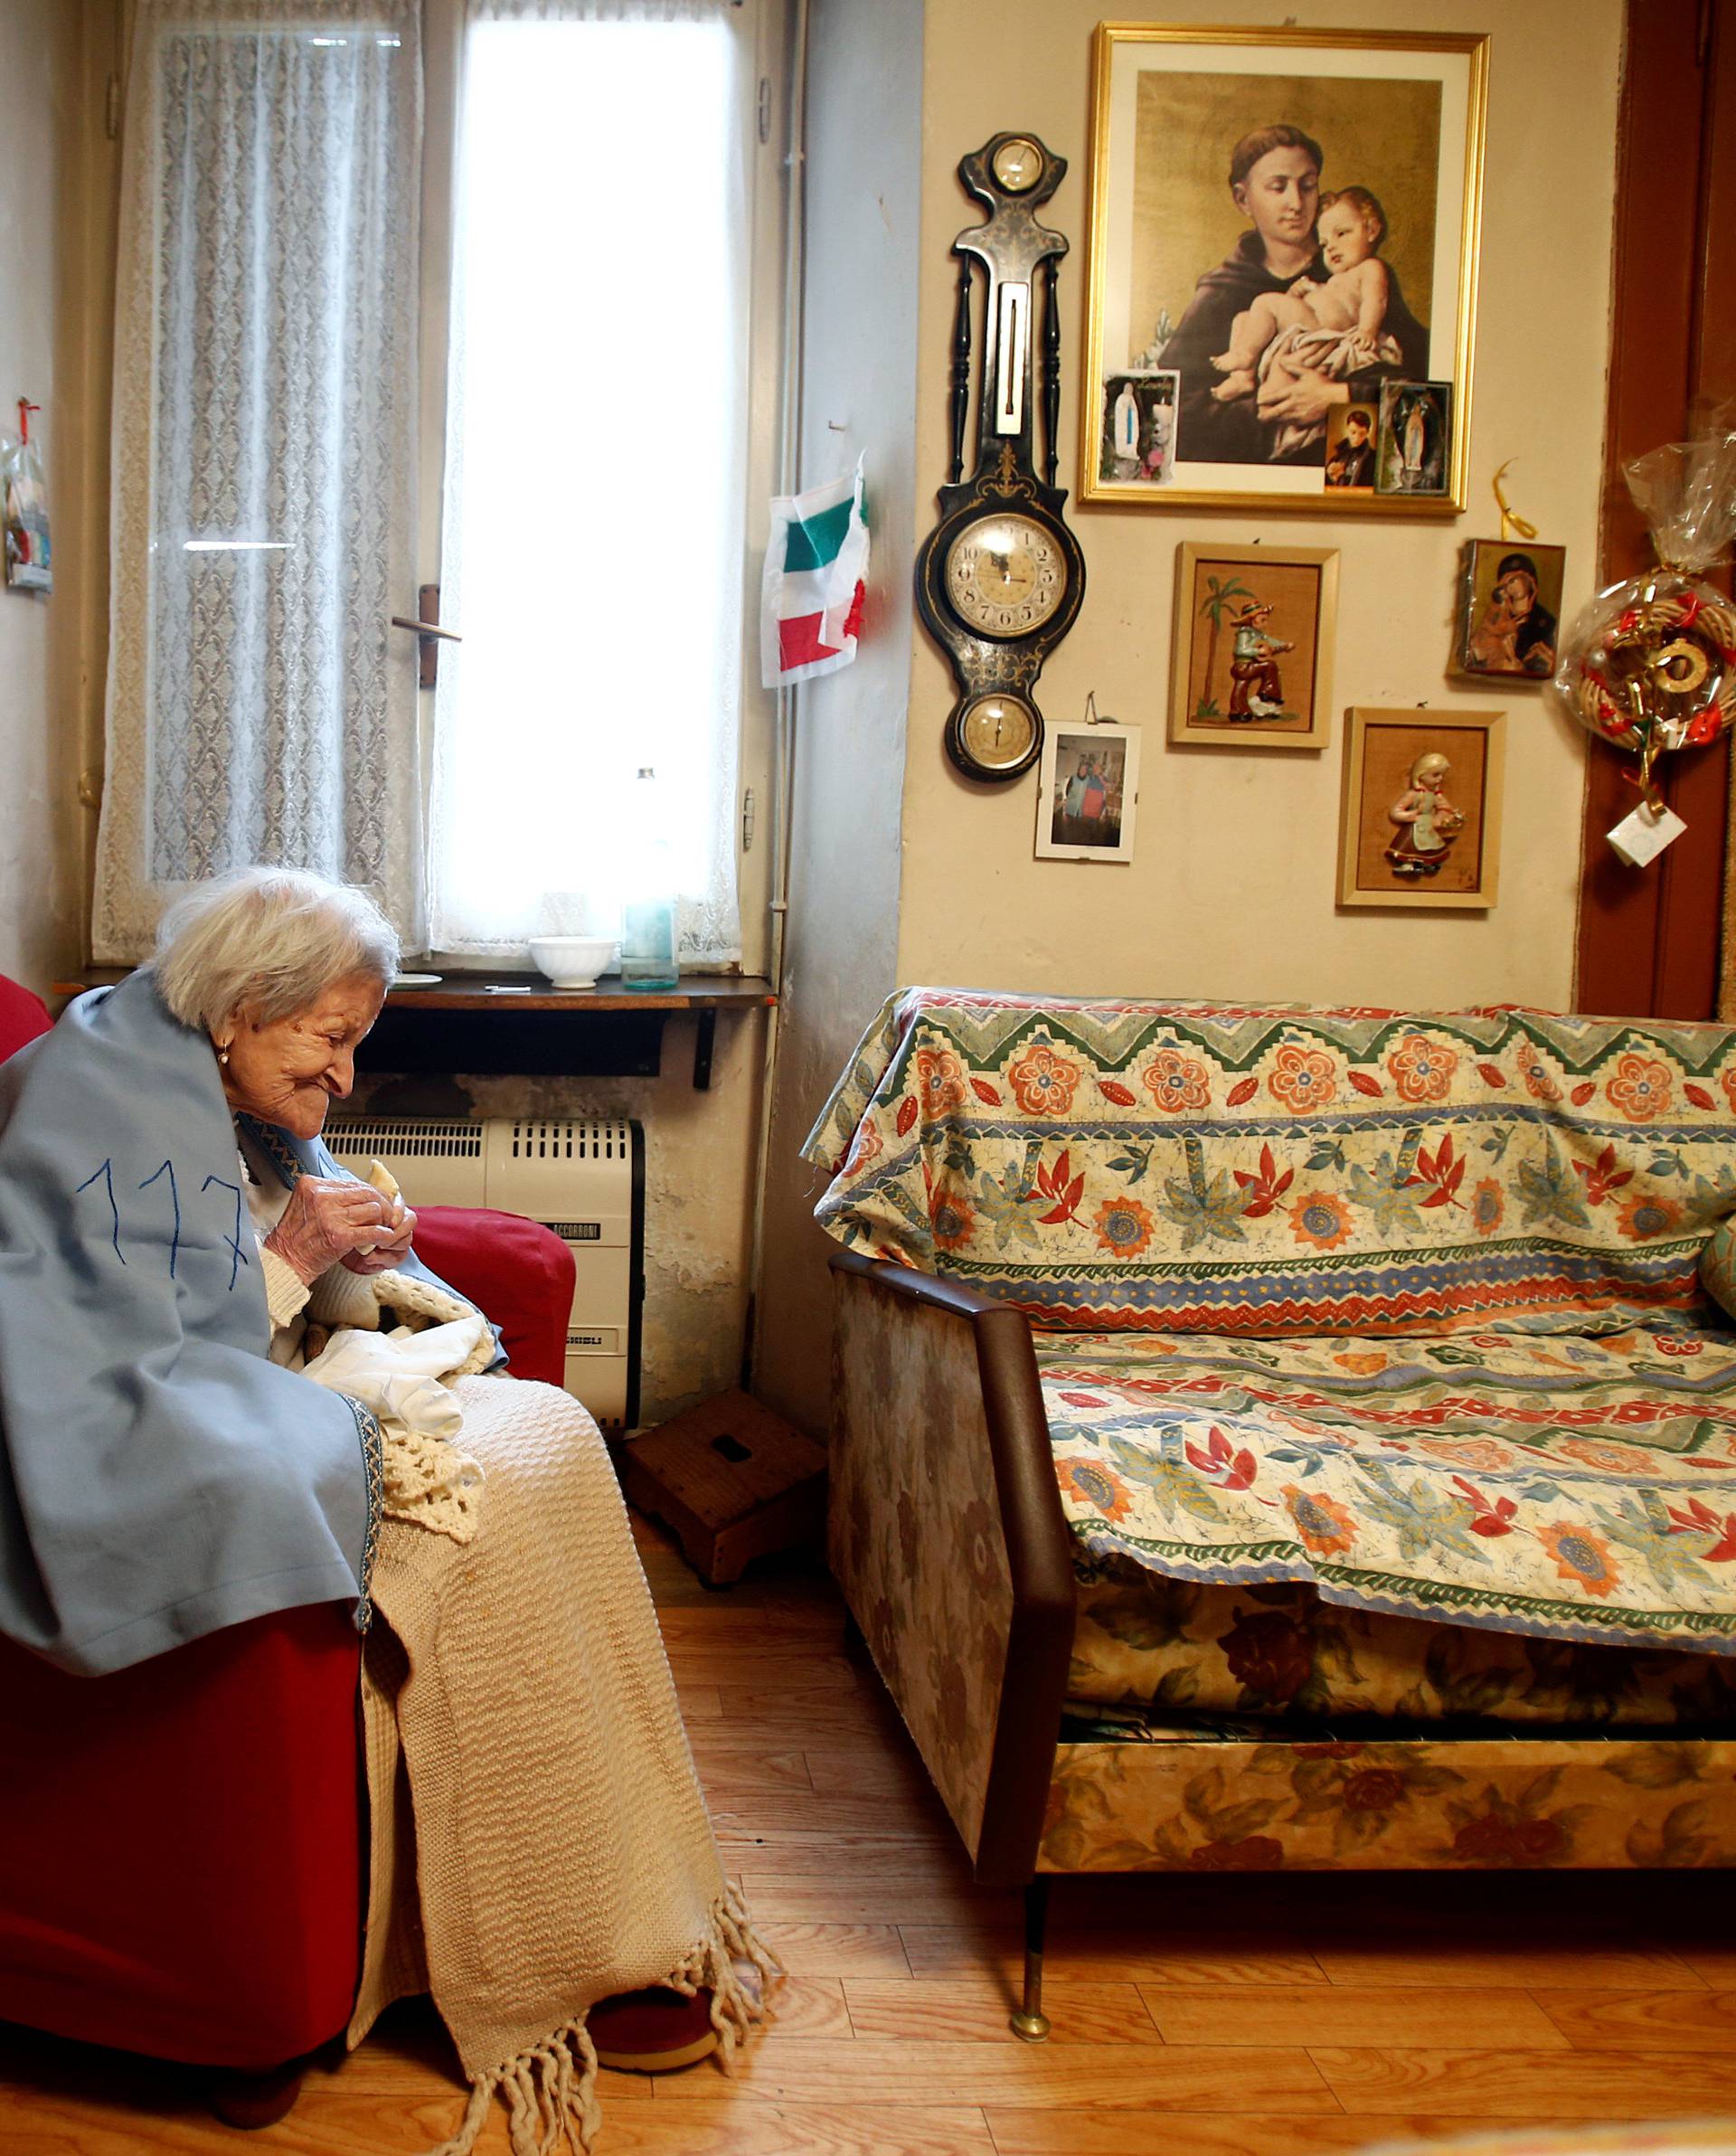 Emma Morano, thought to be the world's oldest person and the last to be born in the 1800s, is seen during her 117th birthday in her house in Verbania